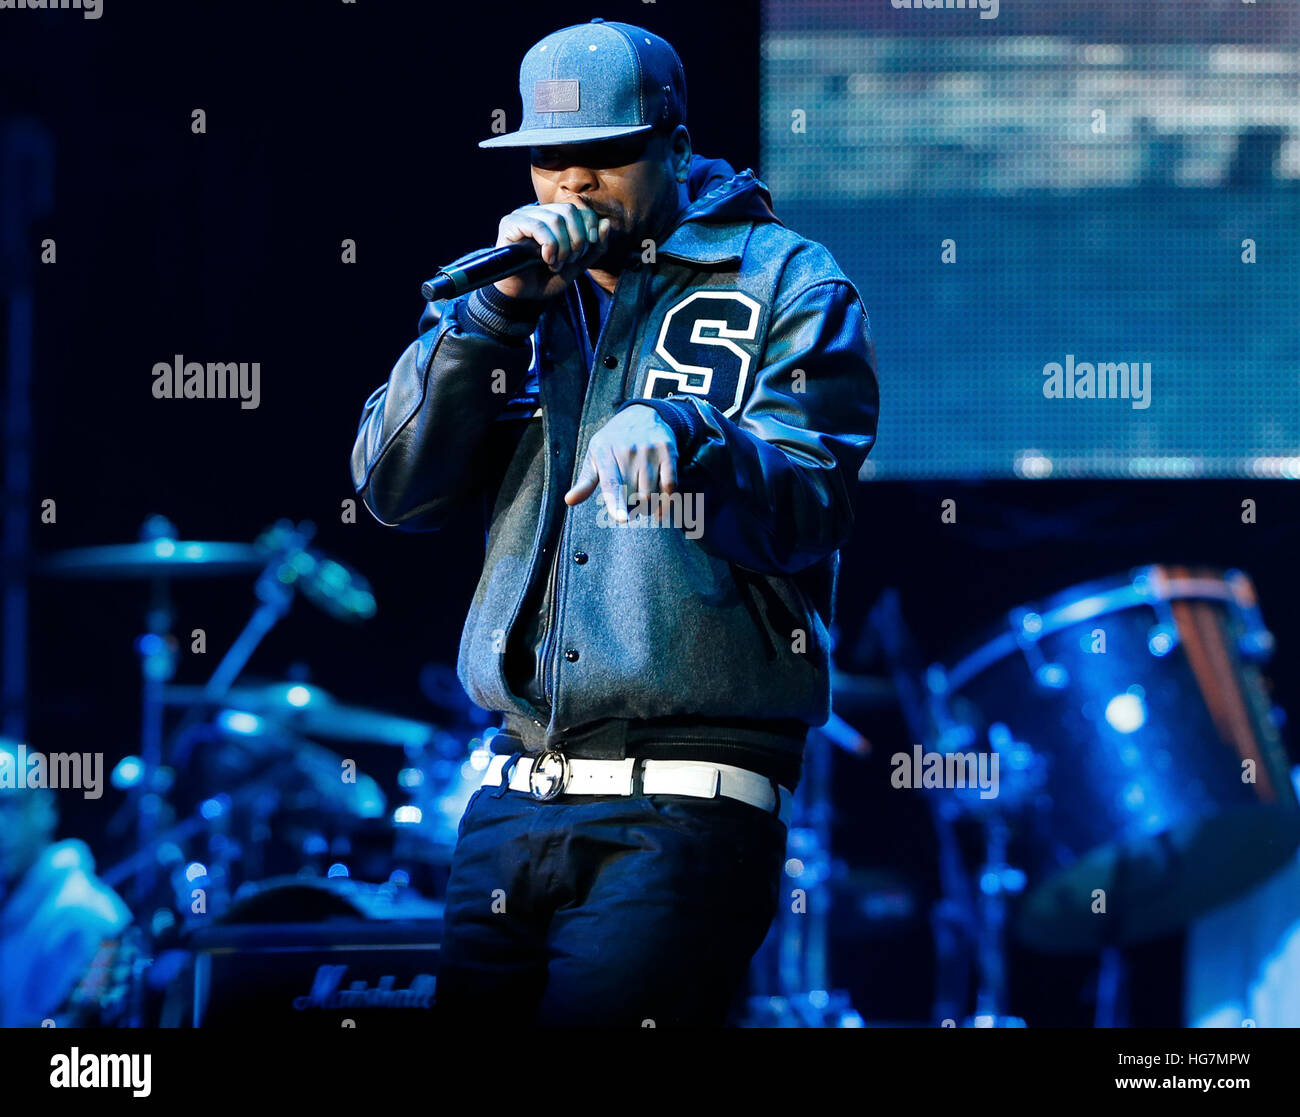 https://c8.alamy.com/comp/HG7MPW/method-man-performs-at-hot-97s-hot-for-the-holidays-HG7MPW.jpg